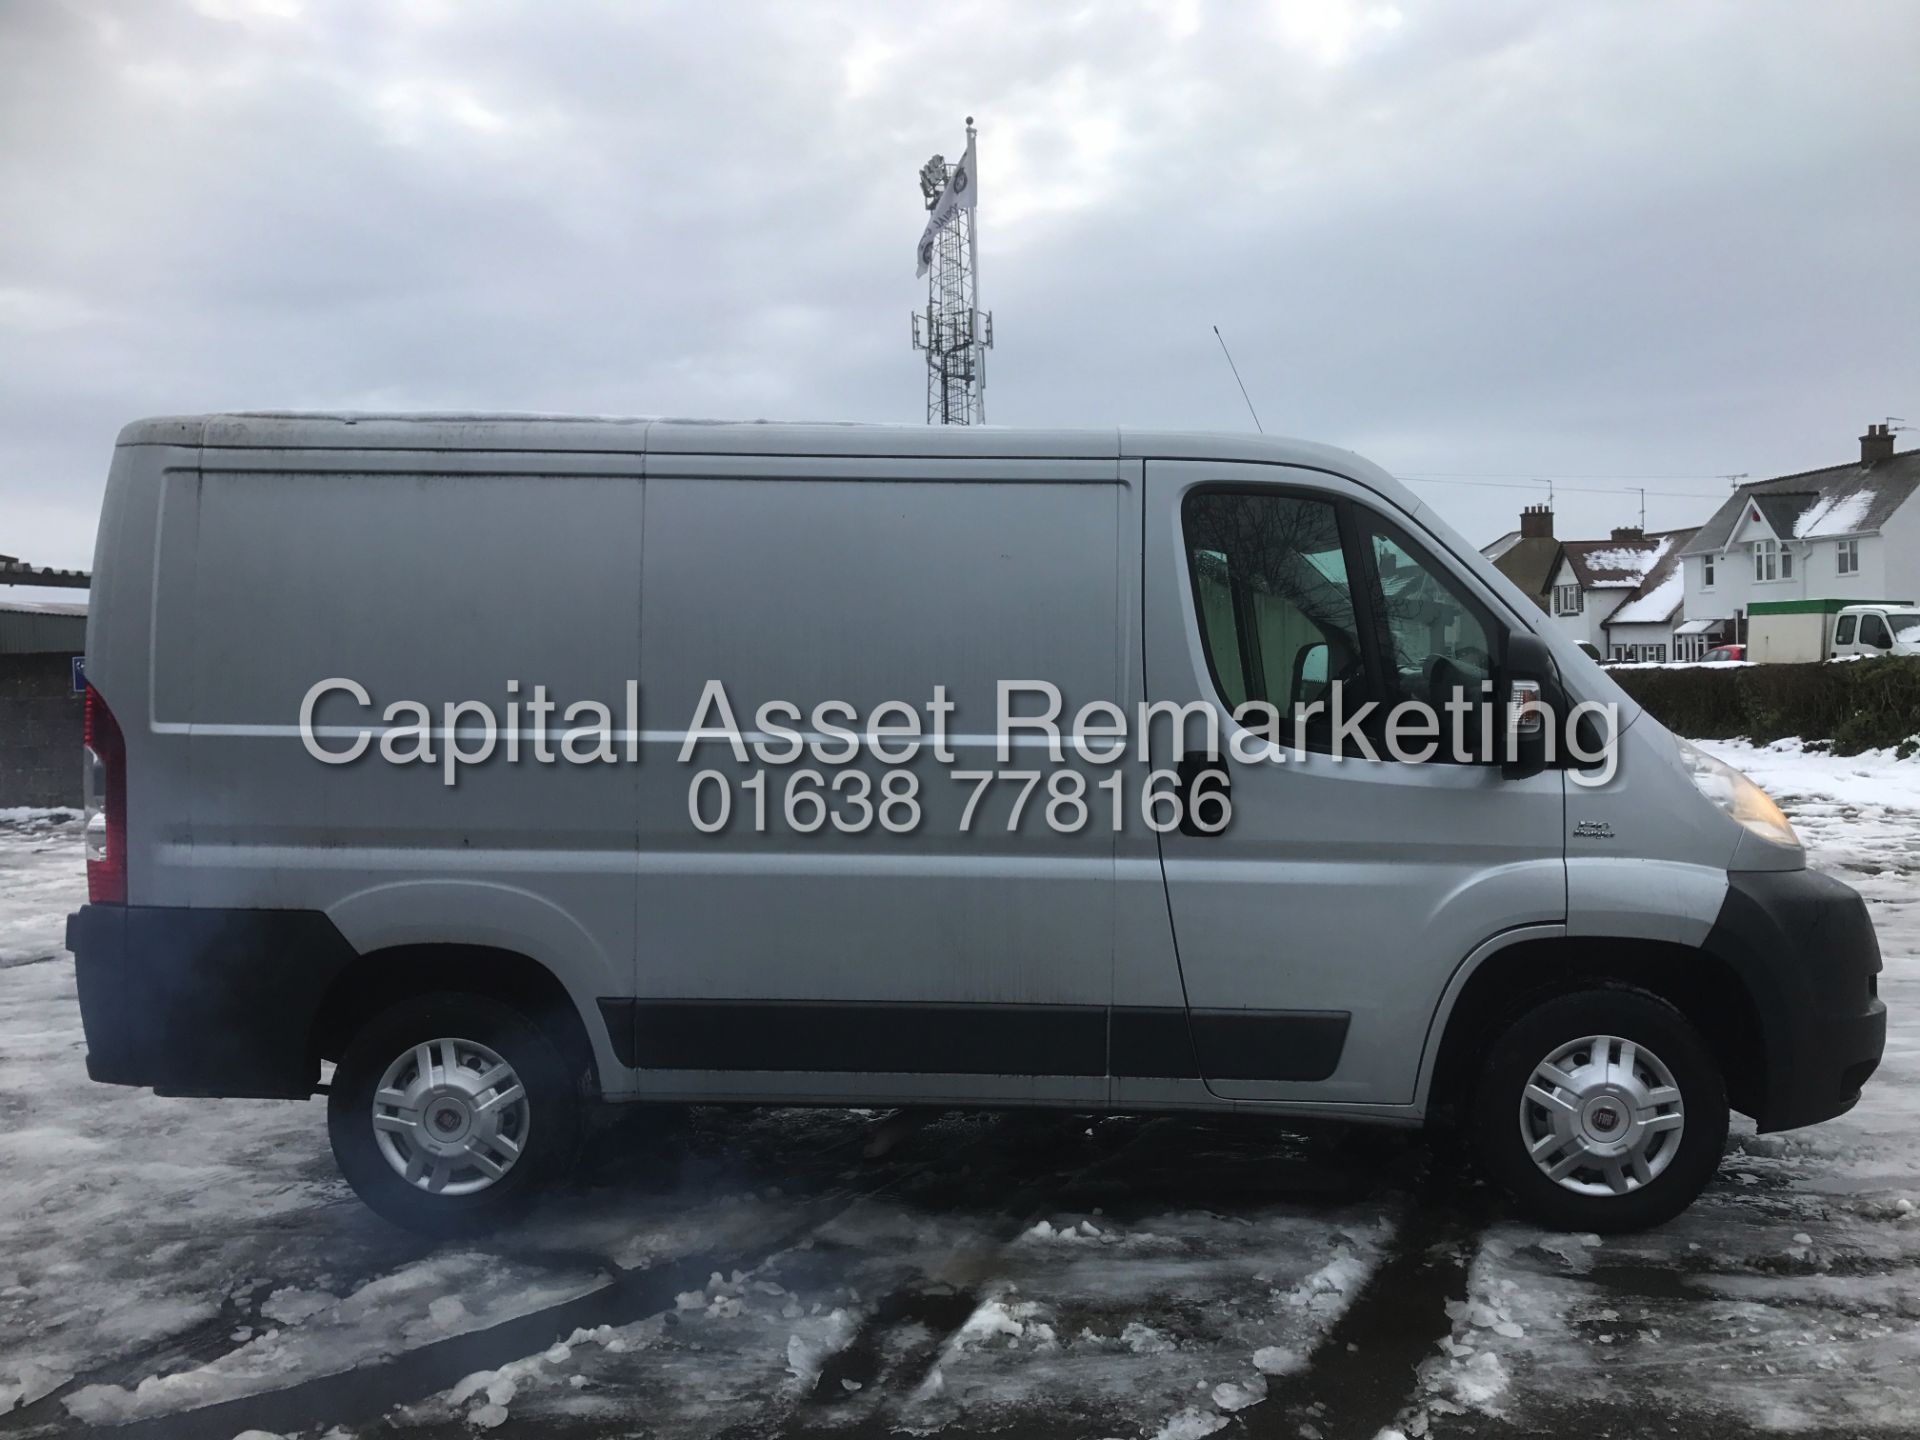 On Sale FIAT DUCATO 2.3 MULTIJET "130BHP 6 SPEED"(2013 MODEL - NEW SHAPE) 1 OWNER-AIR CON-ELEC PACK - Image 5 of 14